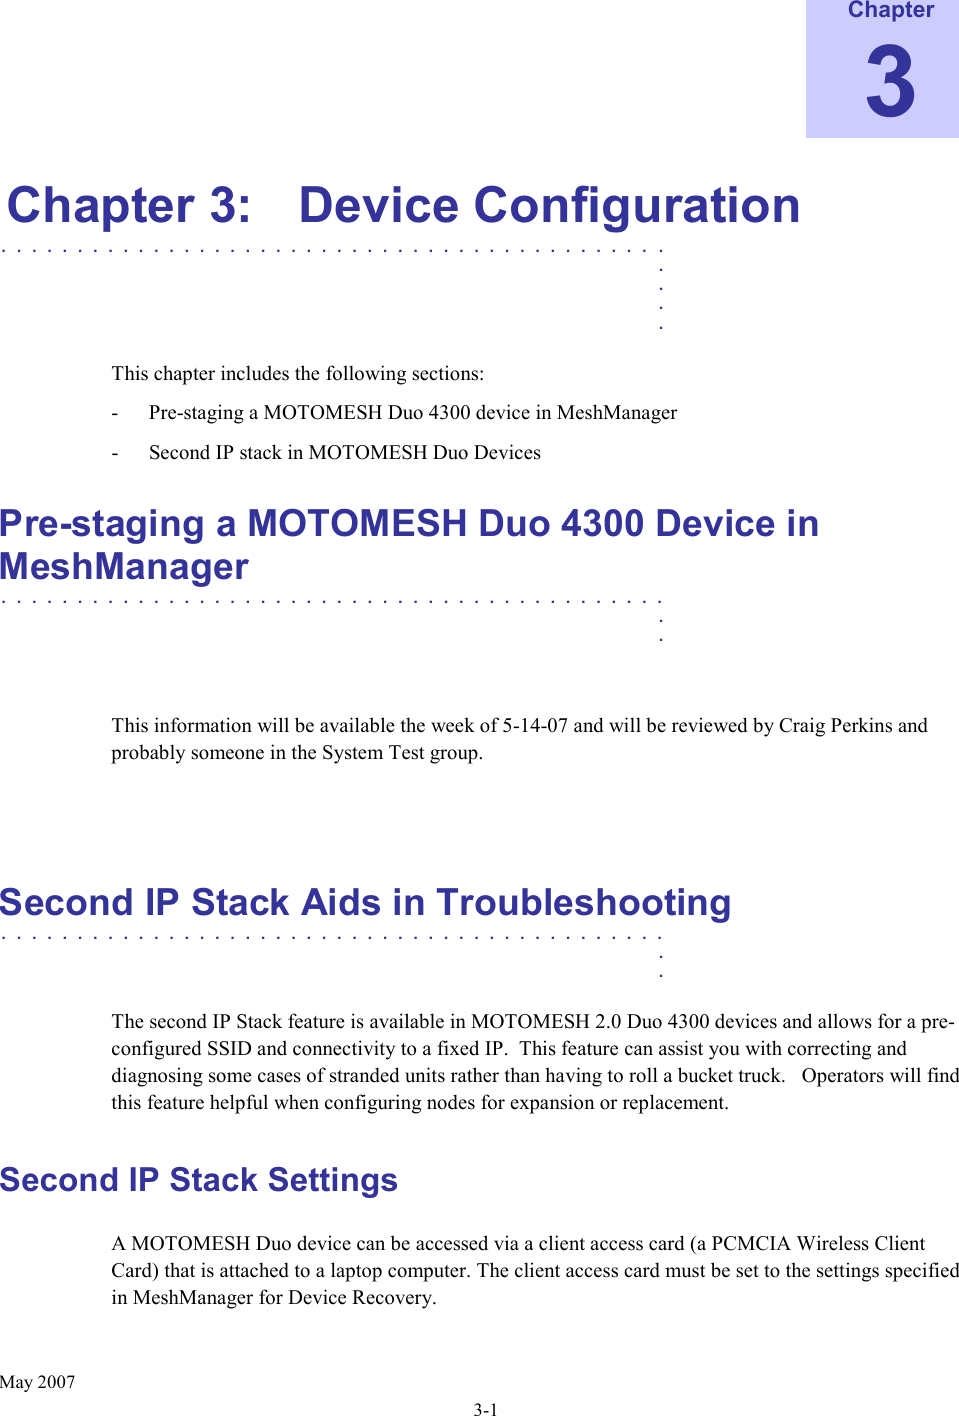      May 2007 3-1 Chapter 3 Chapter 3:  Device Configuration ............................................   .    .    .    .  This chapter includes the following sections: - Pre-staging a MOTOMESH Duo 4300 device in MeshManager - Second IP stack in MOTOMESH Duo Devices Pre-staging a MOTOMESH Duo 4300 Device in MeshManager  ............................................   .    .   This information will be available the week of 5-14-07 and will be reviewed by Craig Perkins and probably someone in the System Test group.   Second IP Stack Aids in Troubleshooting ............................................   .    .  The second IP Stack feature is available in MOTOMESH 2.0 Duo 4300 devices and allows for a pre-configured SSID and connectivity to a fixed IP.  This feature can assist you with correcting and diagnosing some cases of stranded units rather than having to roll a bucket truck.   Operators will find this feature helpful when configuring nodes for expansion or replacement. Second IP Stack Settings A MOTOMESH Duo device can be accessed via a client access card (a PCMCIA Wireless Client Card) that is attached to a laptop computer. The client access card must be set to the settings specified in MeshManager for Device Recovery. 